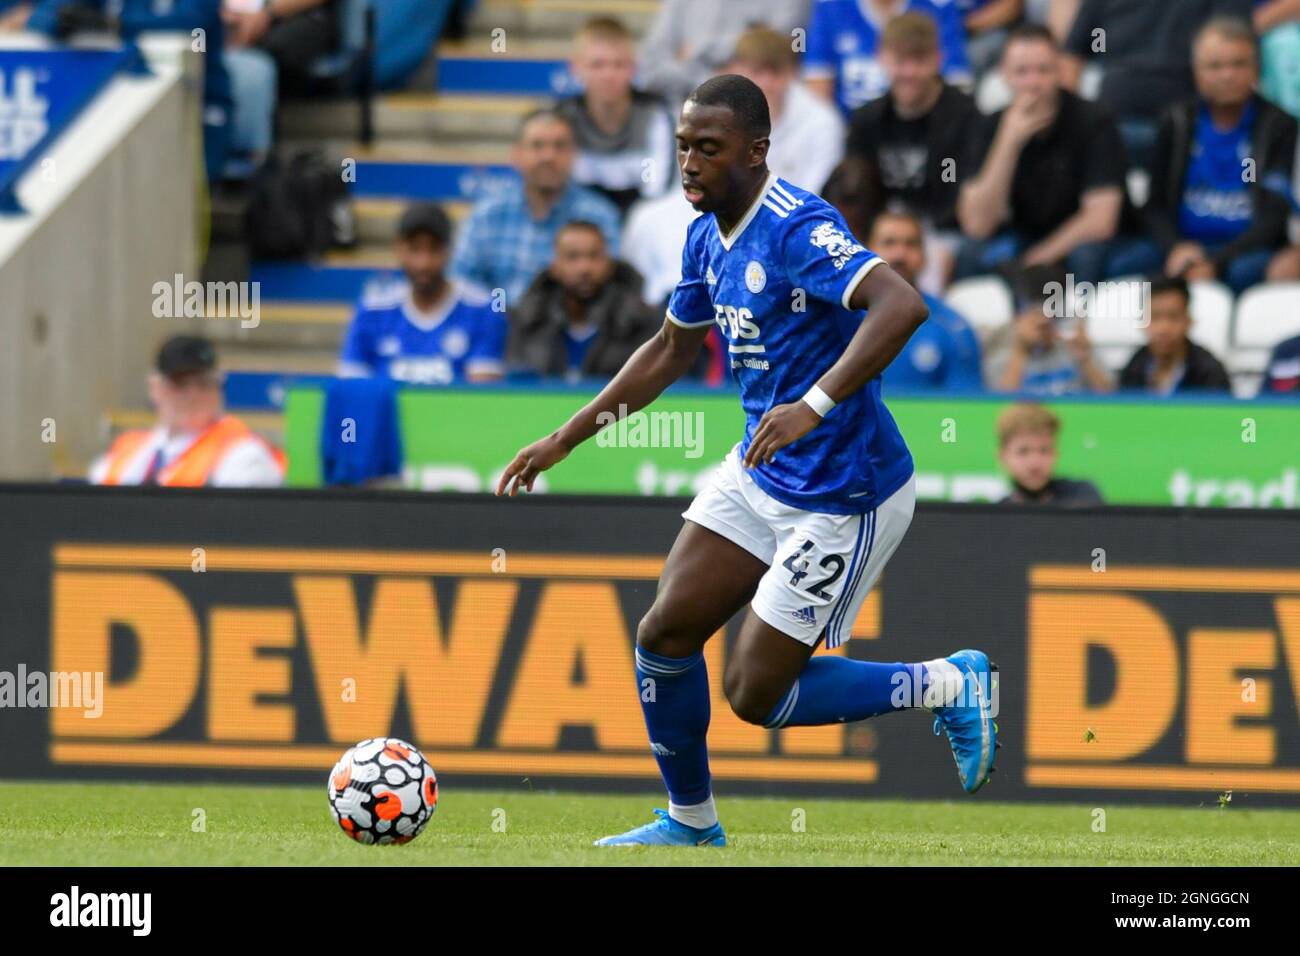 Leicester, UK. 25th Sep, 2021. Boubakary Soumare #42 of Leicester City runs with the ball in Leicester, United Kingdom on 9/25/2021. (Photo by Simon Whitehead/News Images/Sipa USA) Credit: Sipa USA/Alamy Live News Stock Photo